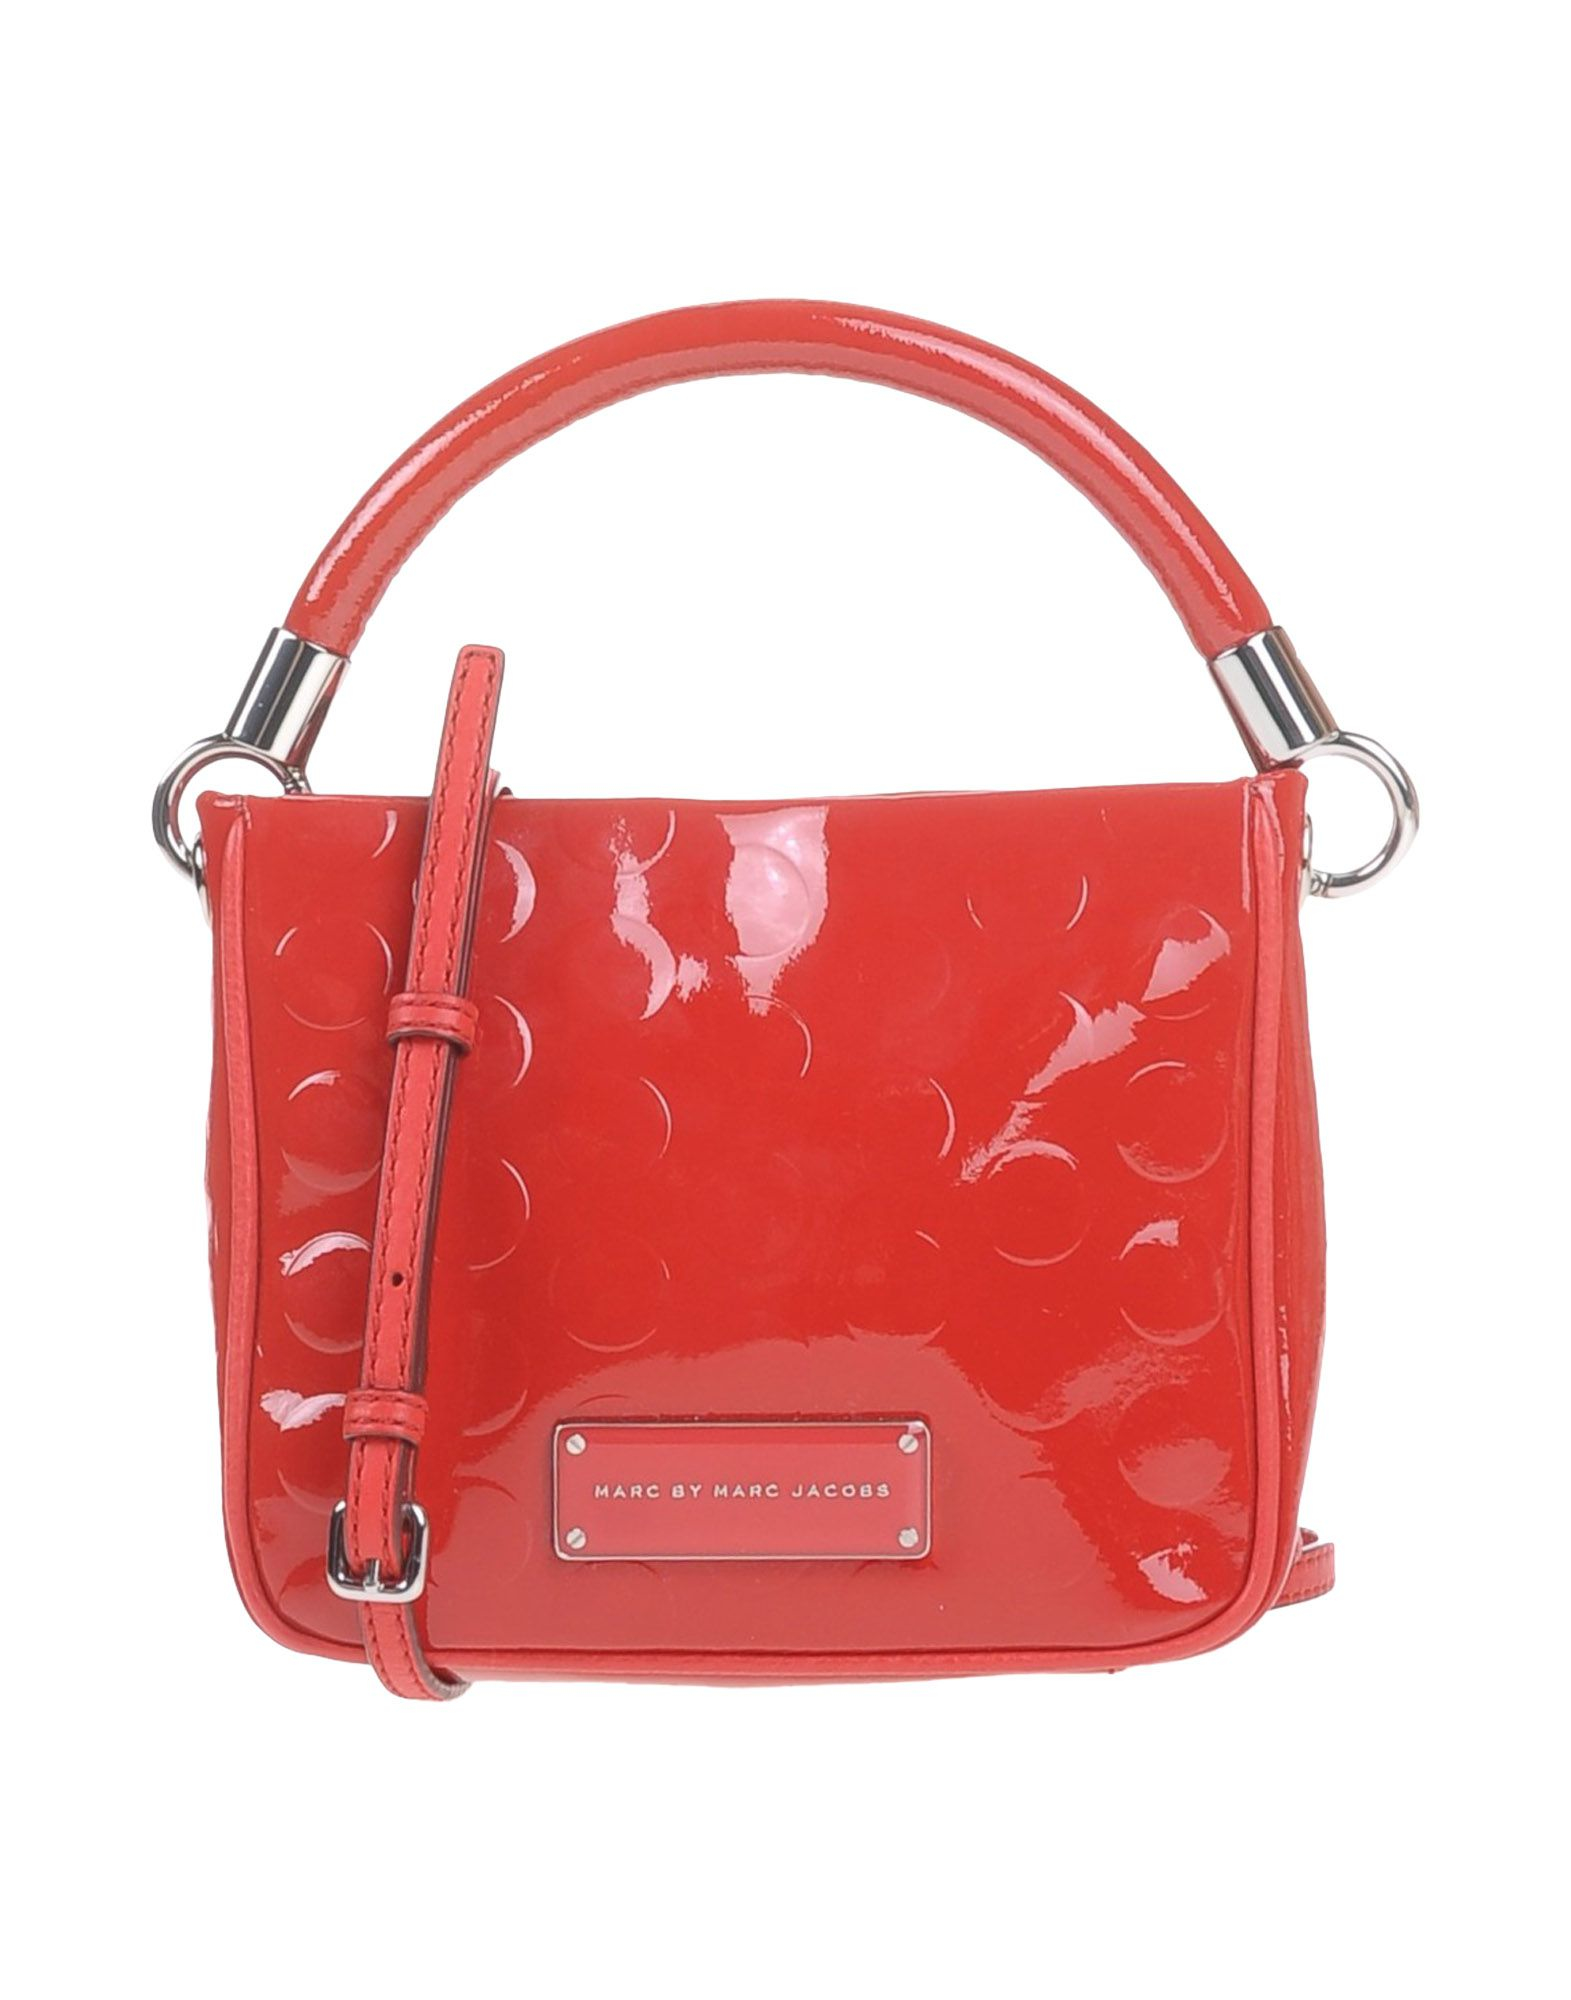 Lyst - Marc By Marc Jacobs Handbag in Red